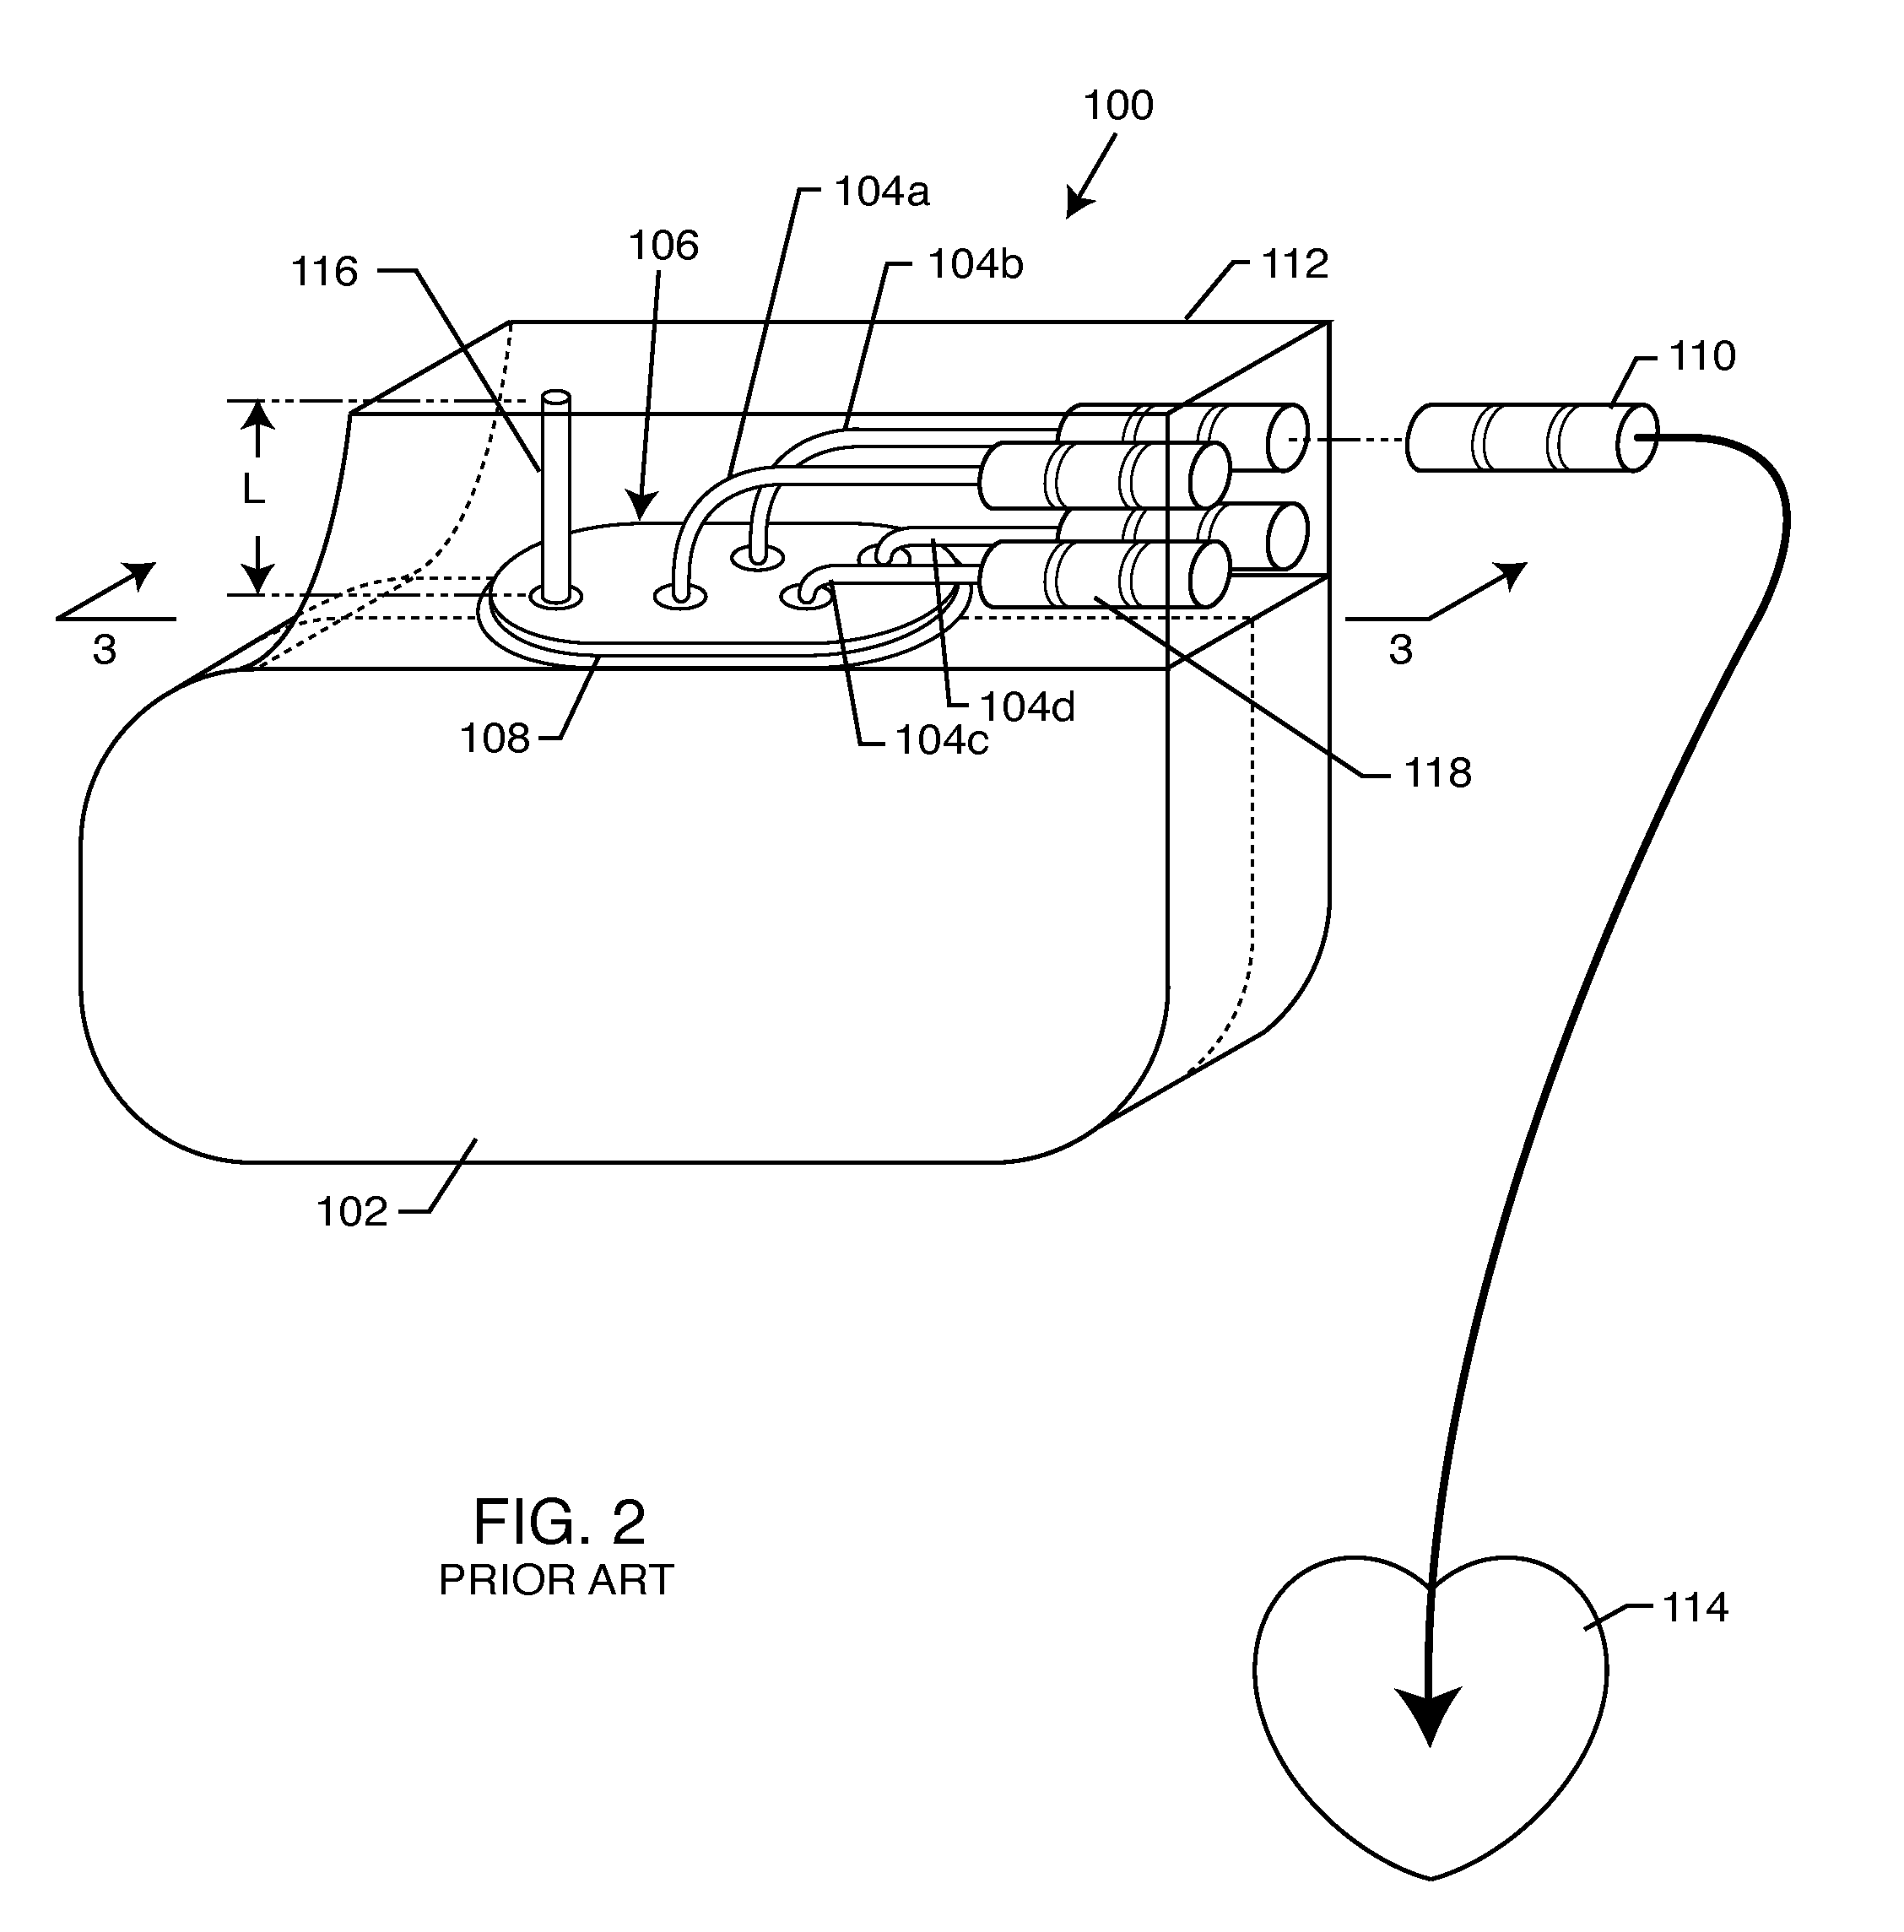 Band stop filter employing a capacitor and an inductor tank circuit to enhance MRI compatibility of active implantable medical devices